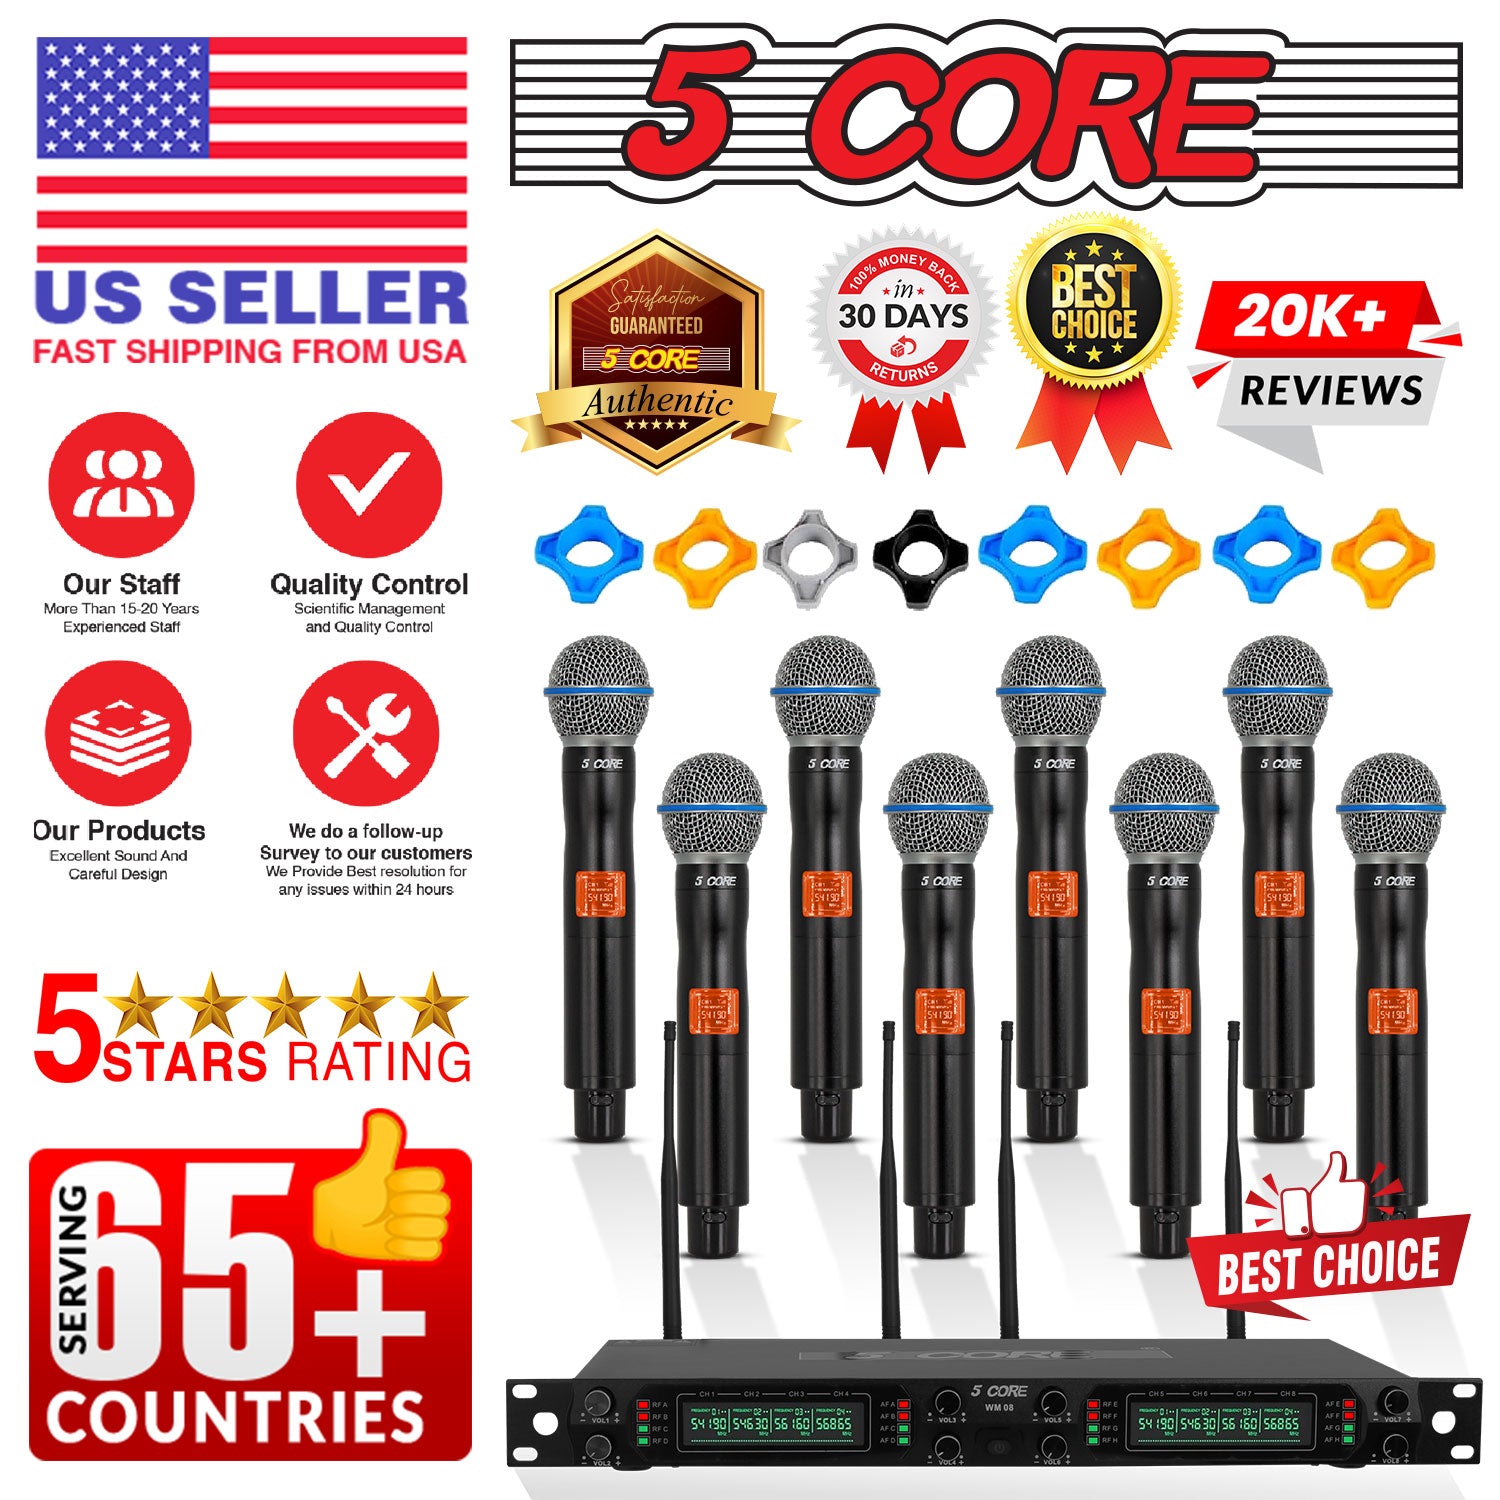 Professional Grade 5 Core Wireless System: 8 UHF Channels with Diverse Cordless Dynamic Microphones for Clear Audio Pickup.